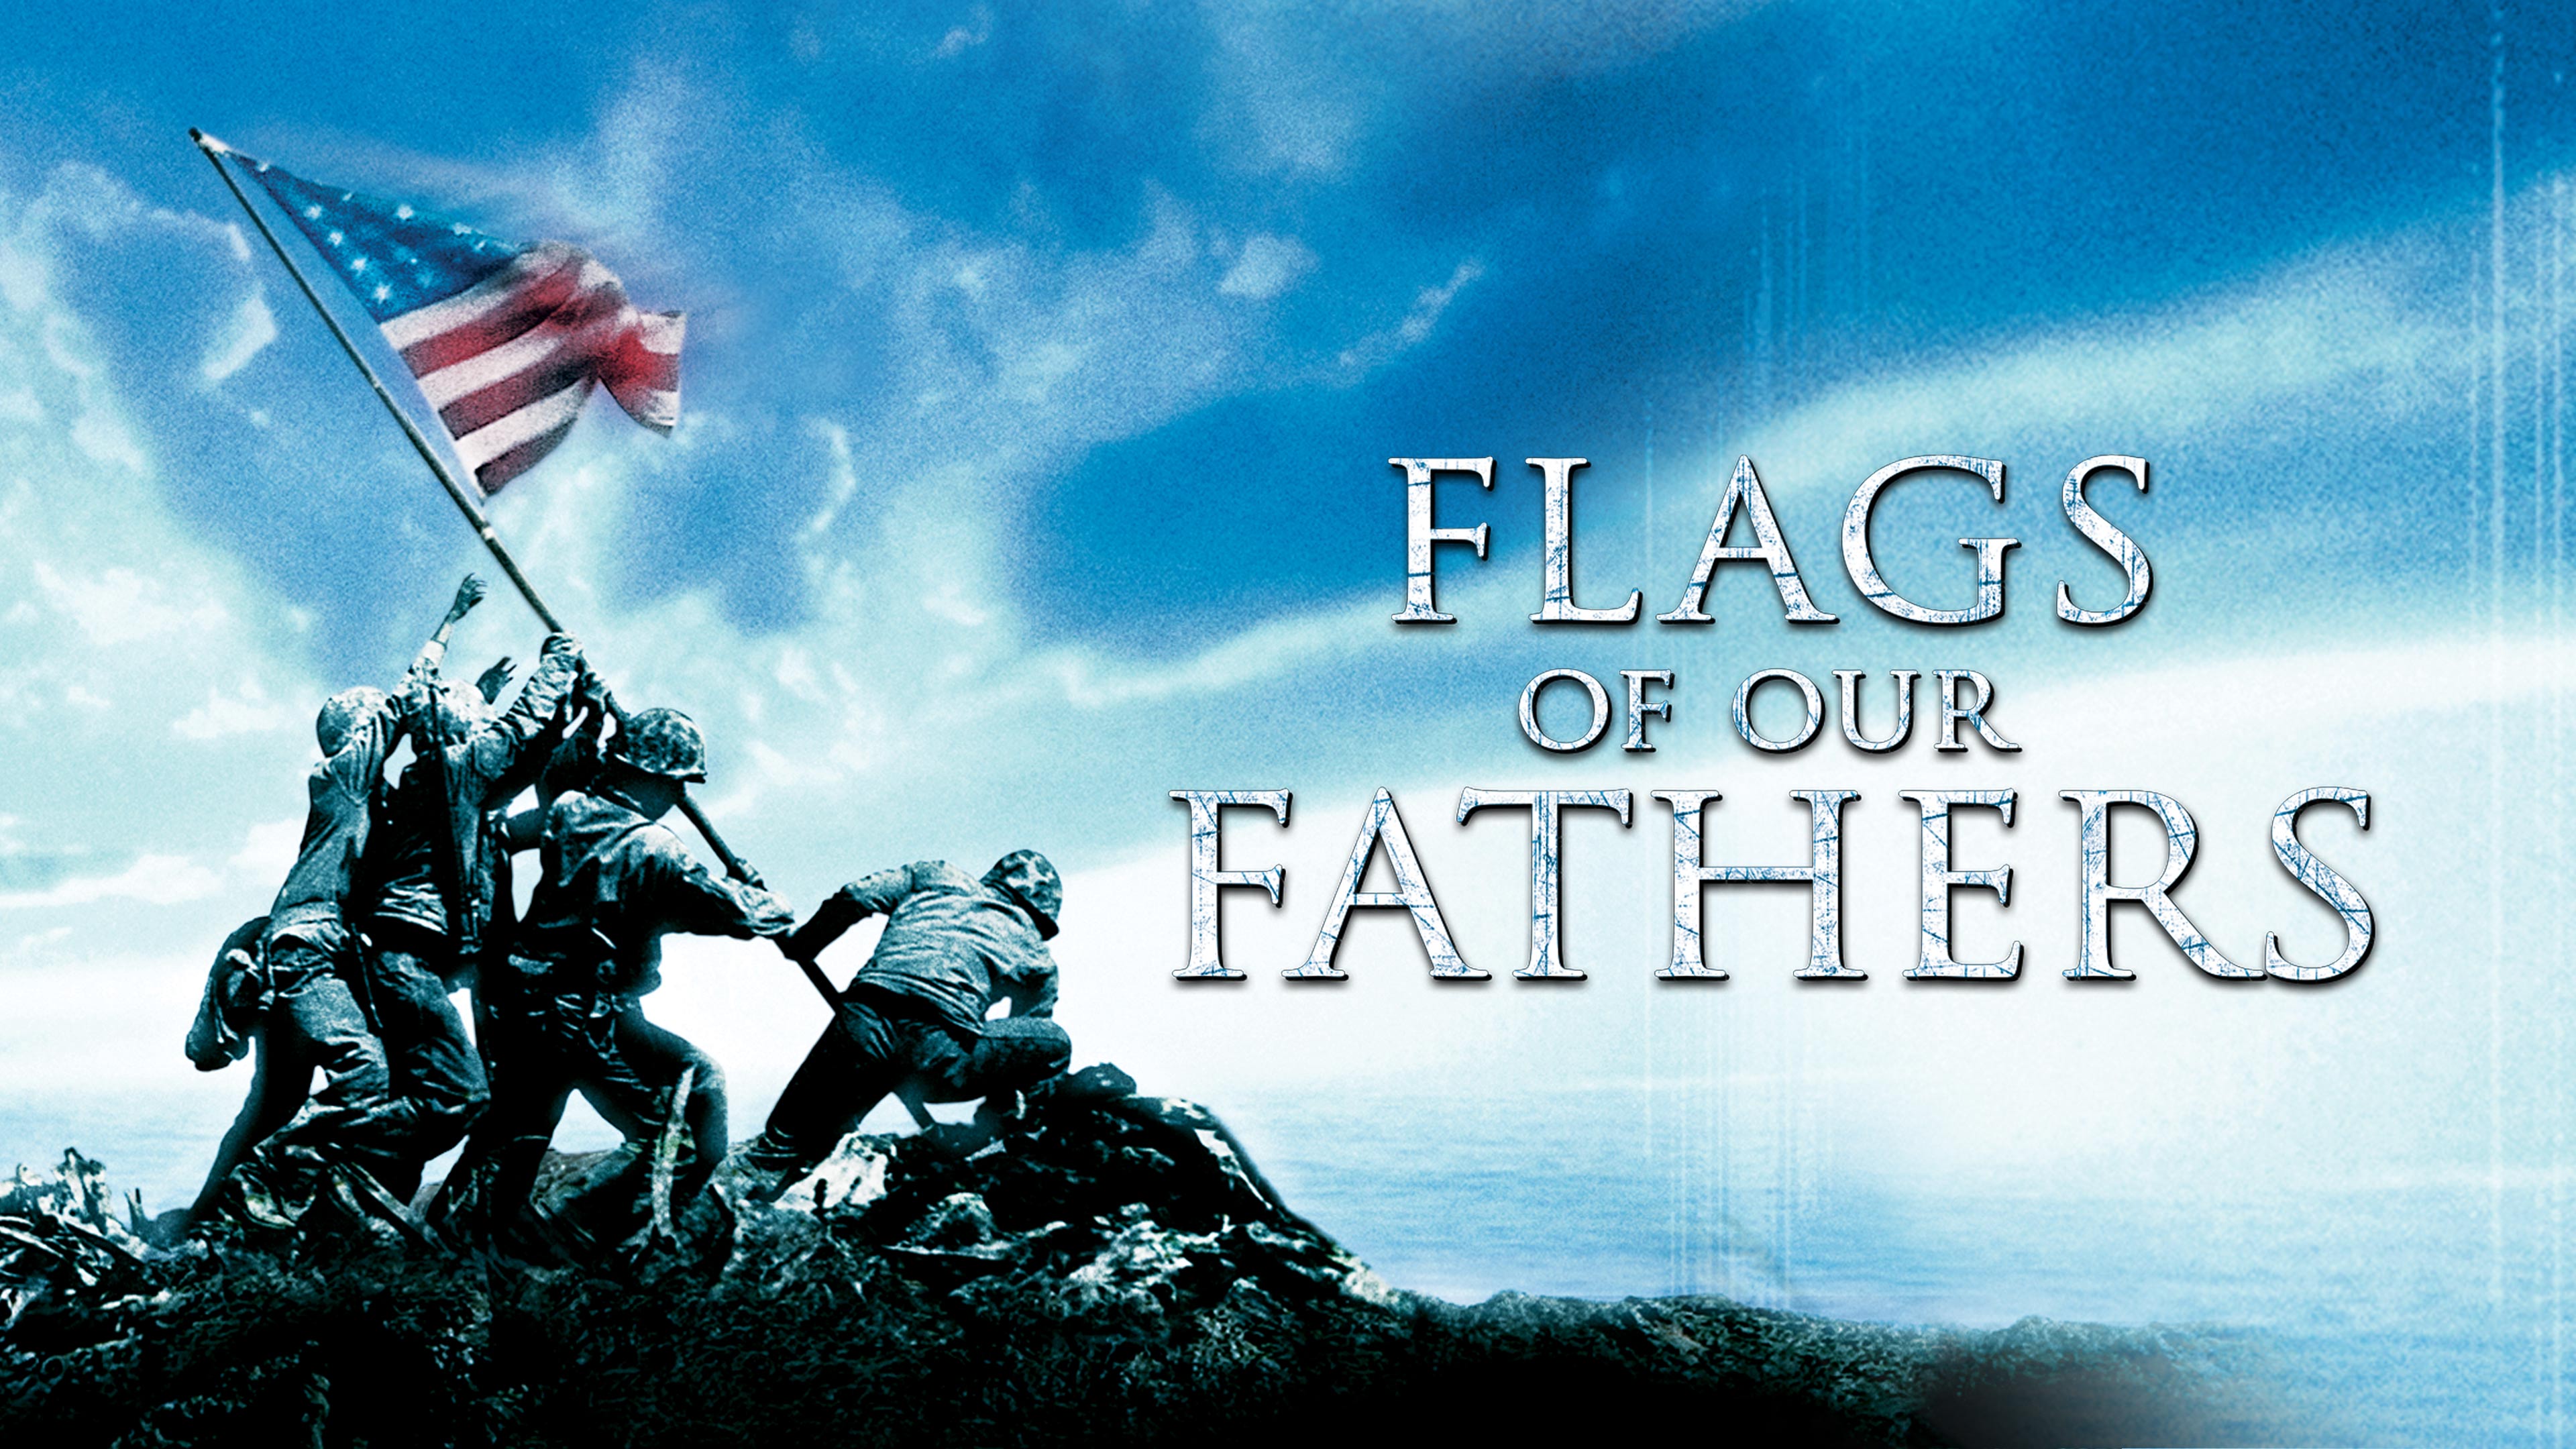 Watch Flags of Our Fathers Online | Stream Full Movies